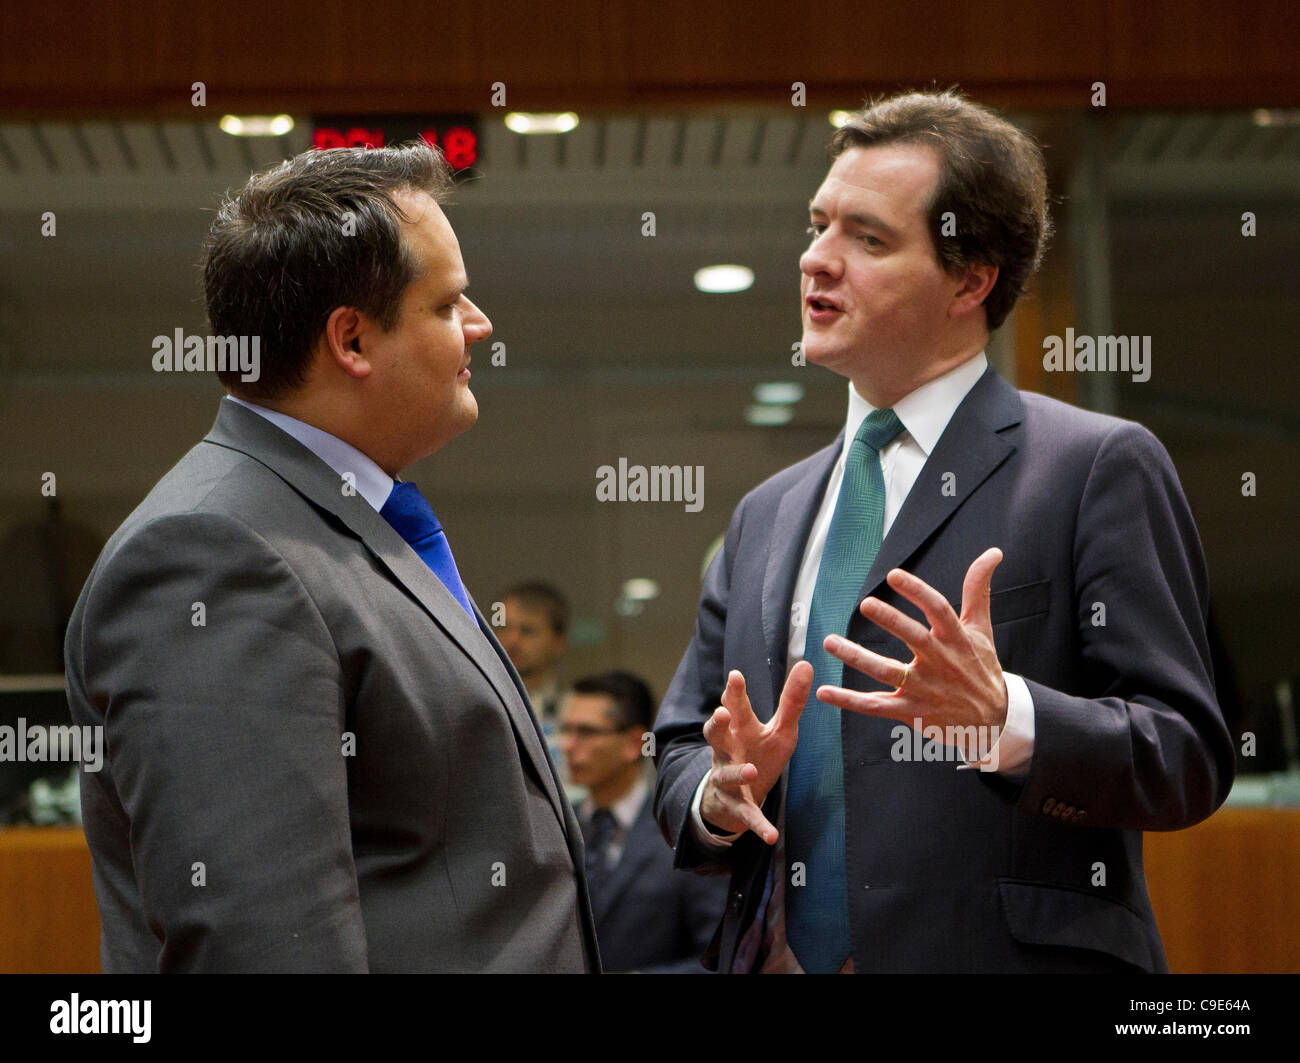 Pictured at the Ecofin meeting of European Finance Ministers were, left to right, Jan Kees de Jager, Finance Minister, Netherlands with British Chancellor of the Exchequer, George Osborne. Stock Photo